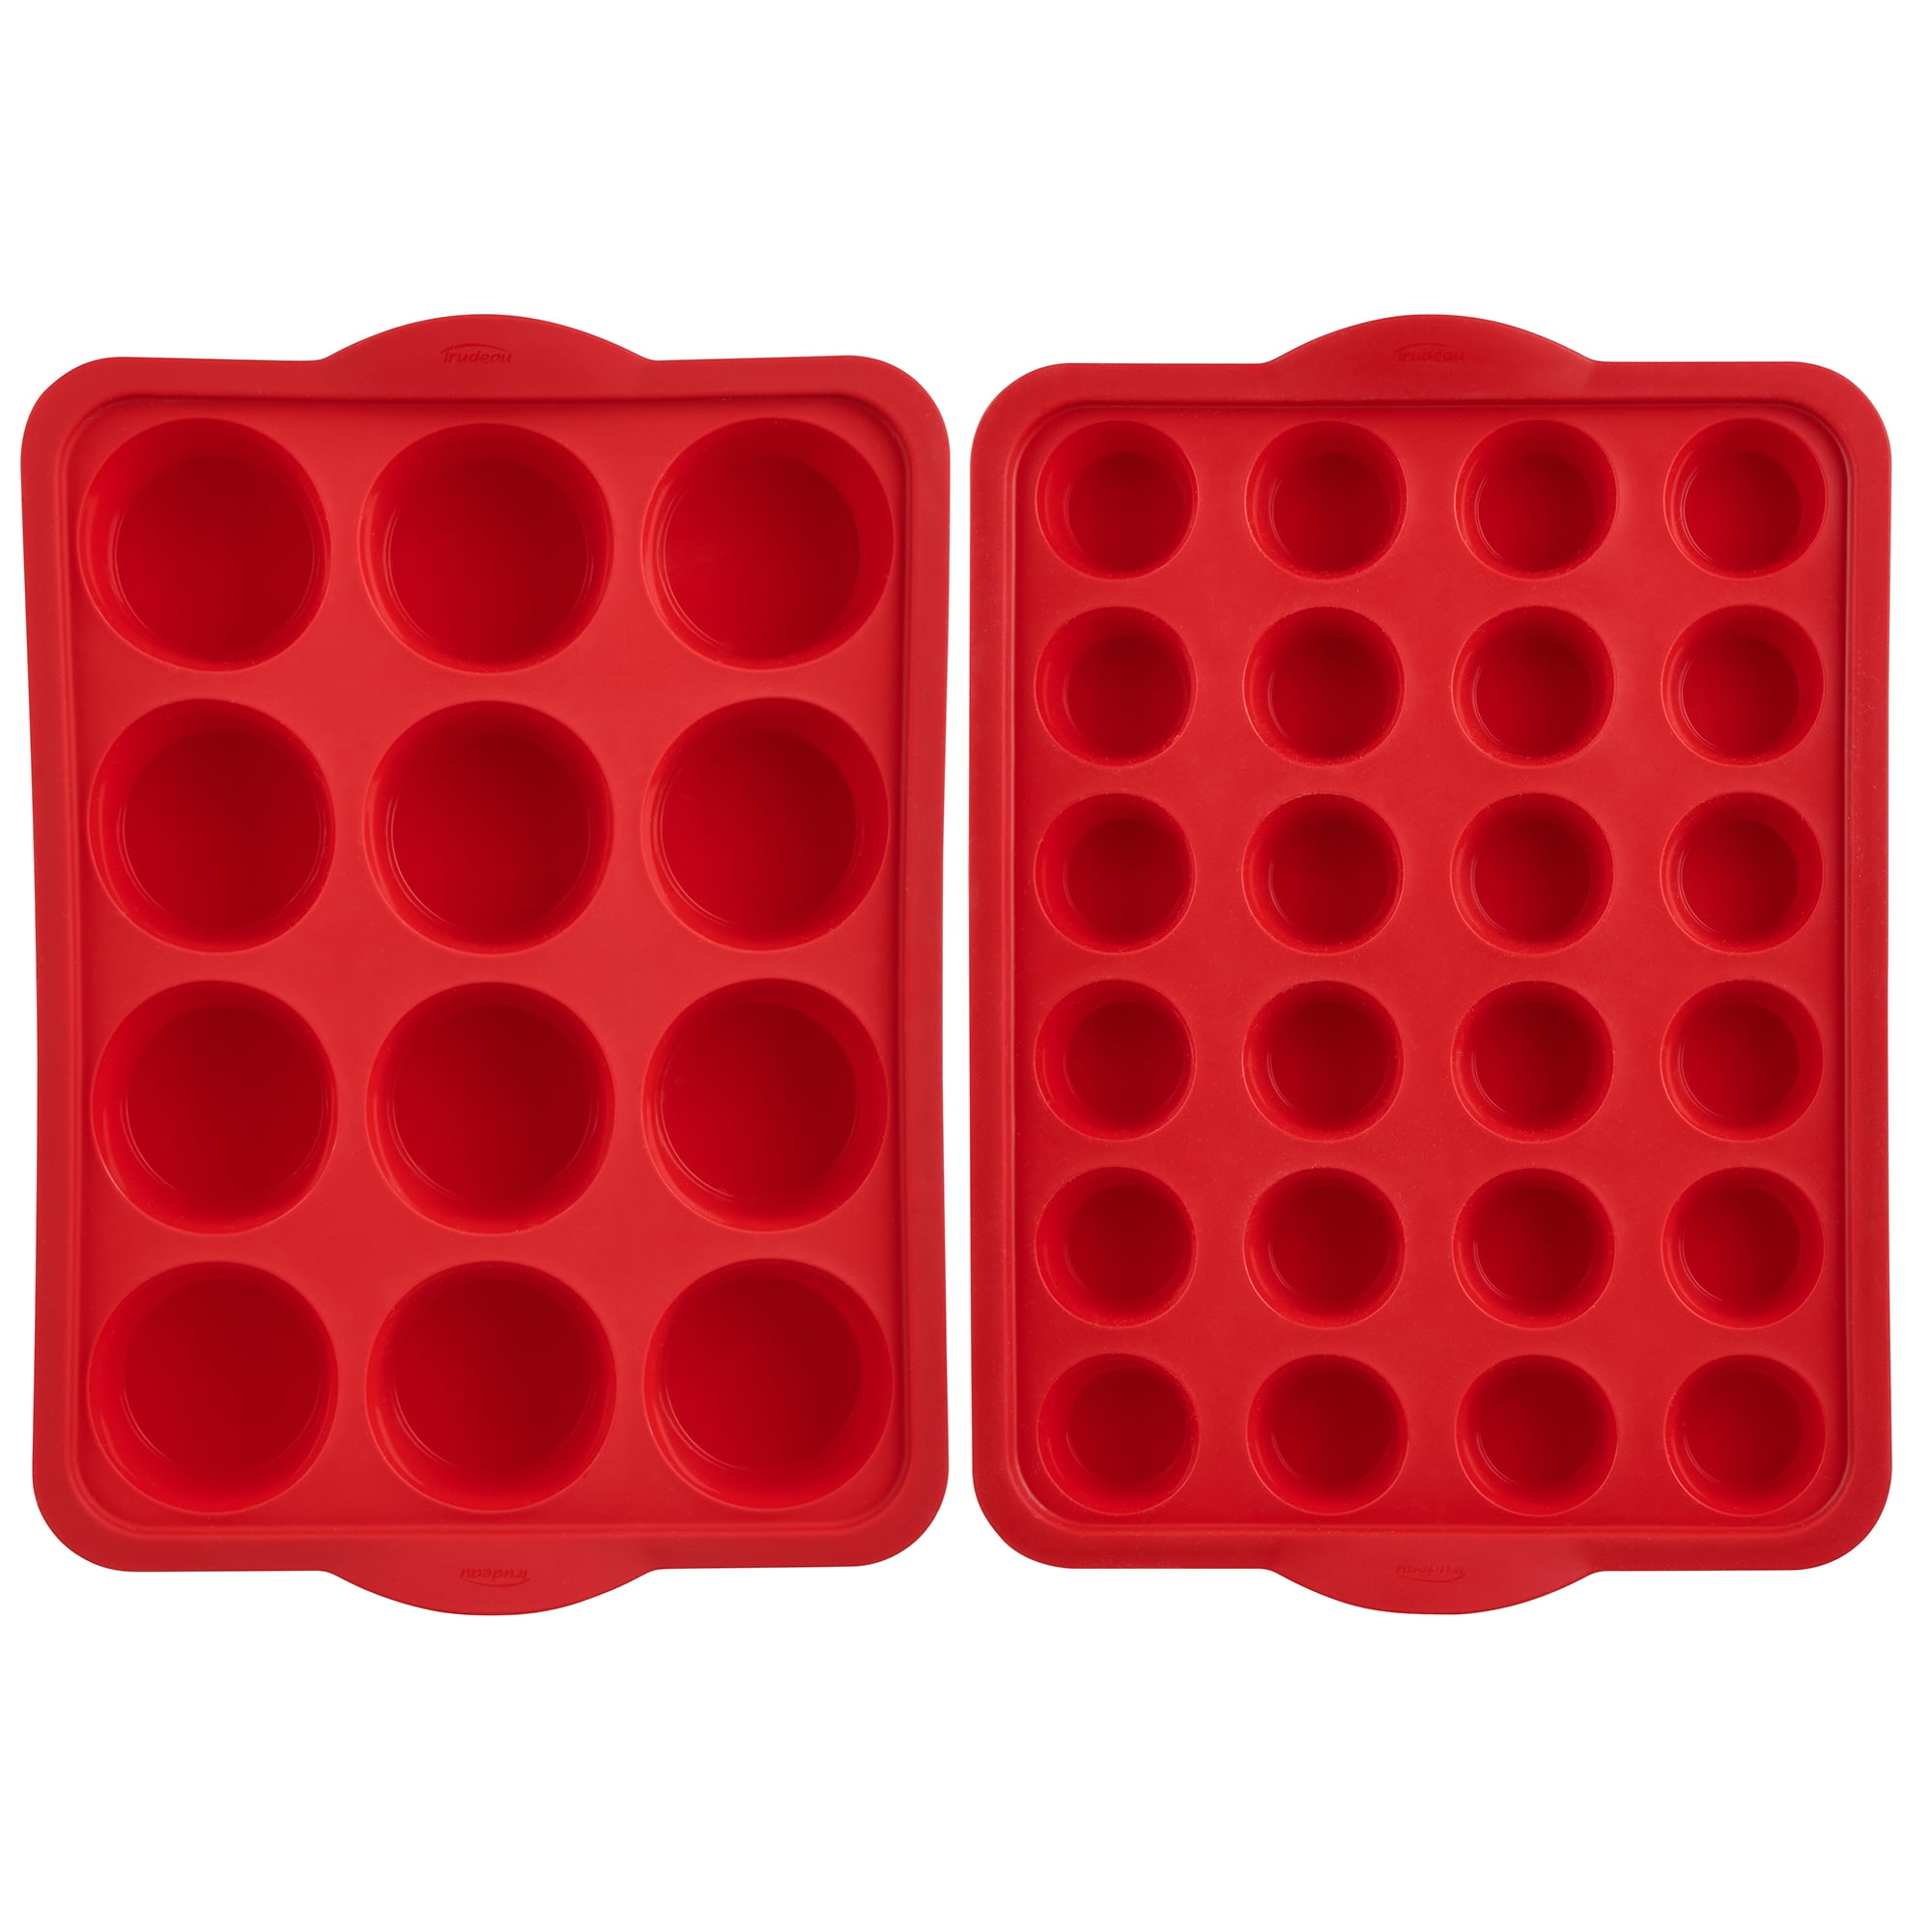 Qtopun Silicone Mini Muffin Pan, 4 Pack 24 Cups Silicone Mold Cups Baking Pan, Silicone Muffin Tins Baking Moulds-Red